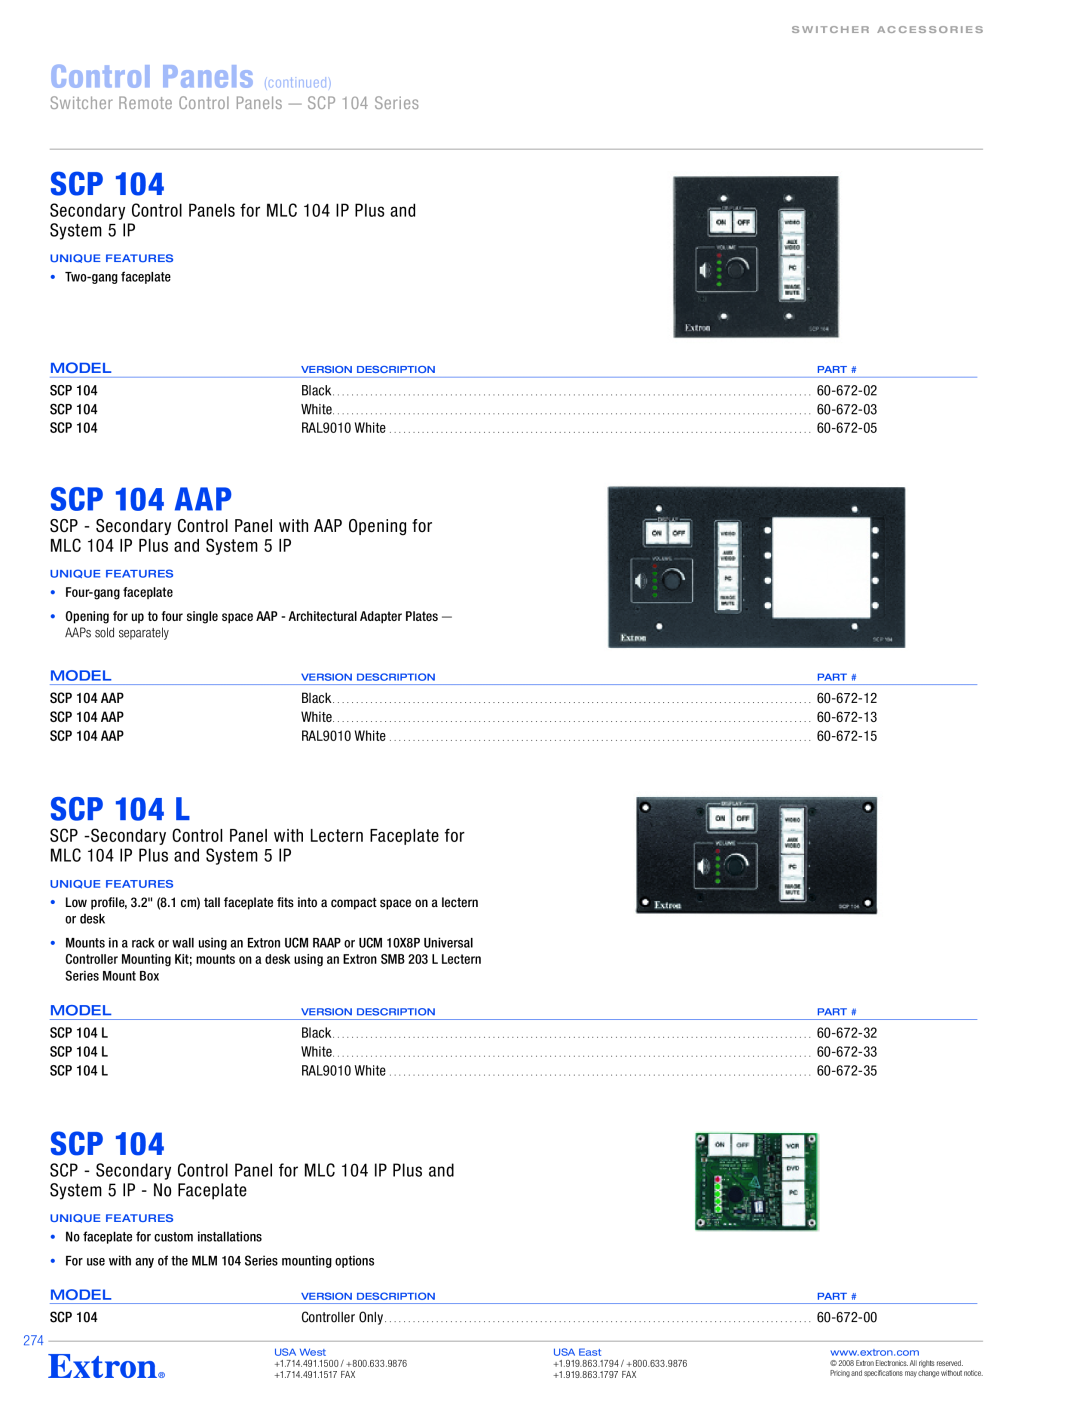 Extron electronic SCP 104 Series Control Panels continued, SCP 104 AAP, SCP 104 L, MLC 104 IP Plus and System 5 IP, Model 